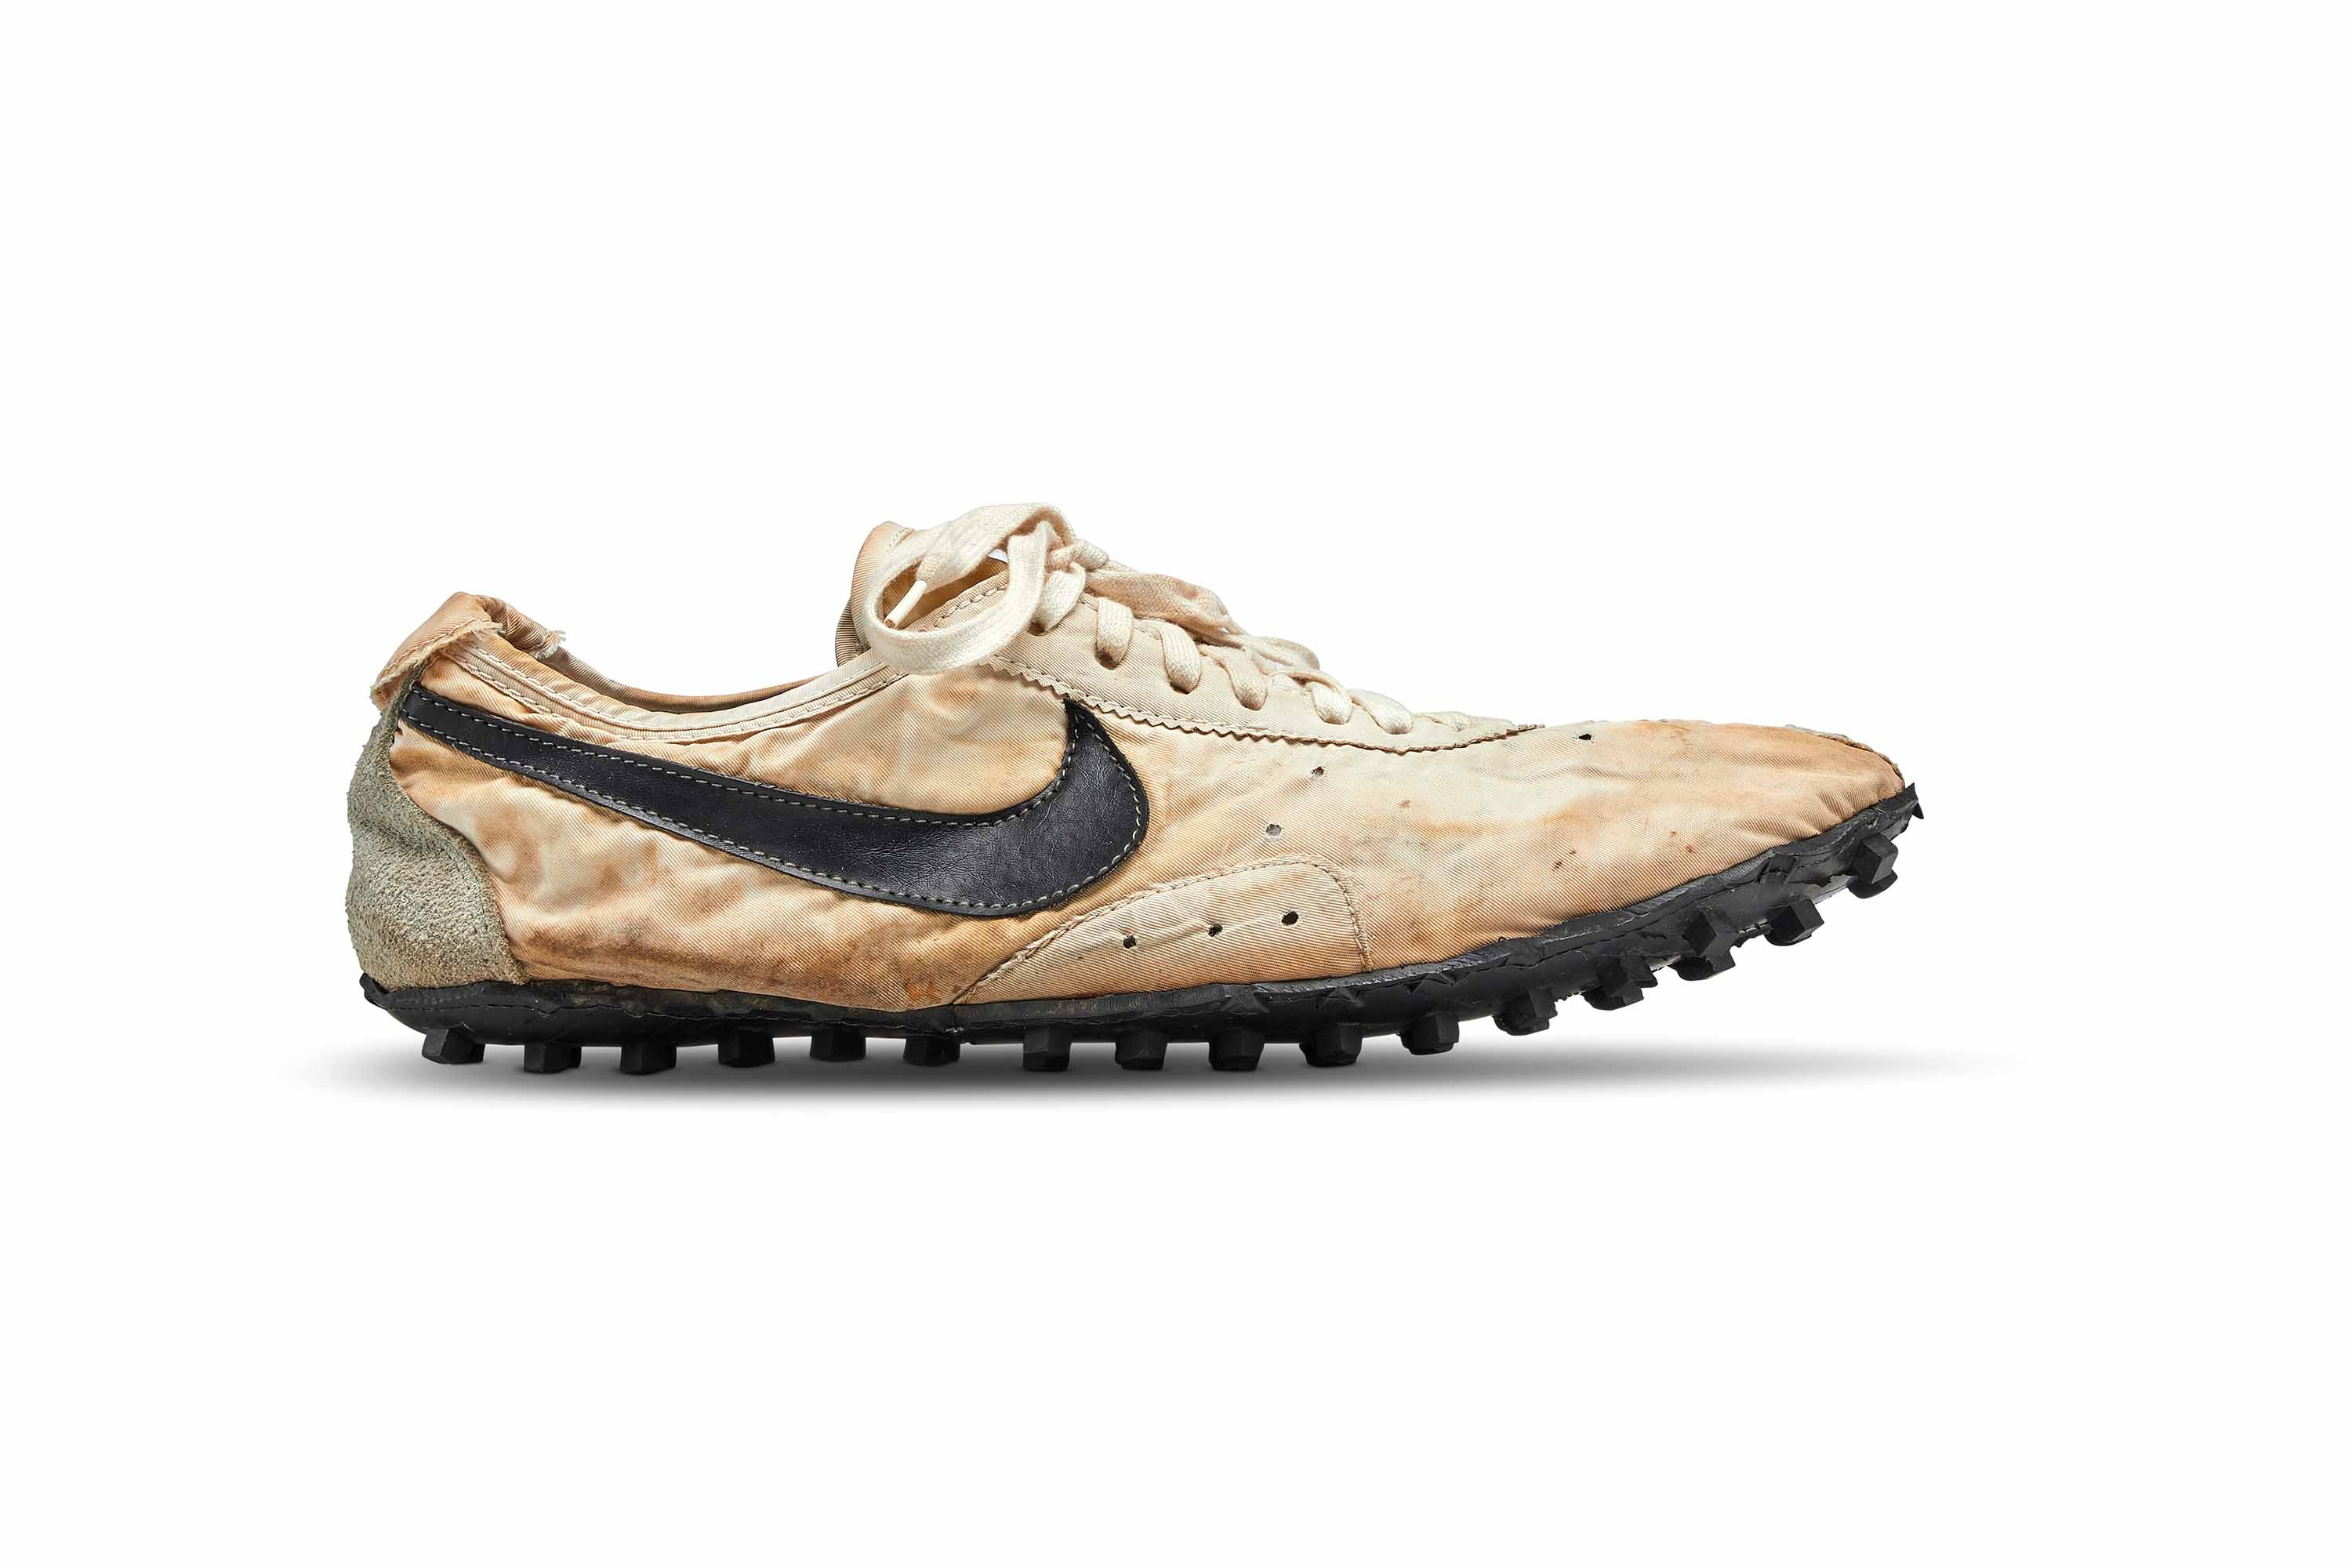 Nike's rare 'Moon is sold for $437,500, shattering the record for sneakers CNN